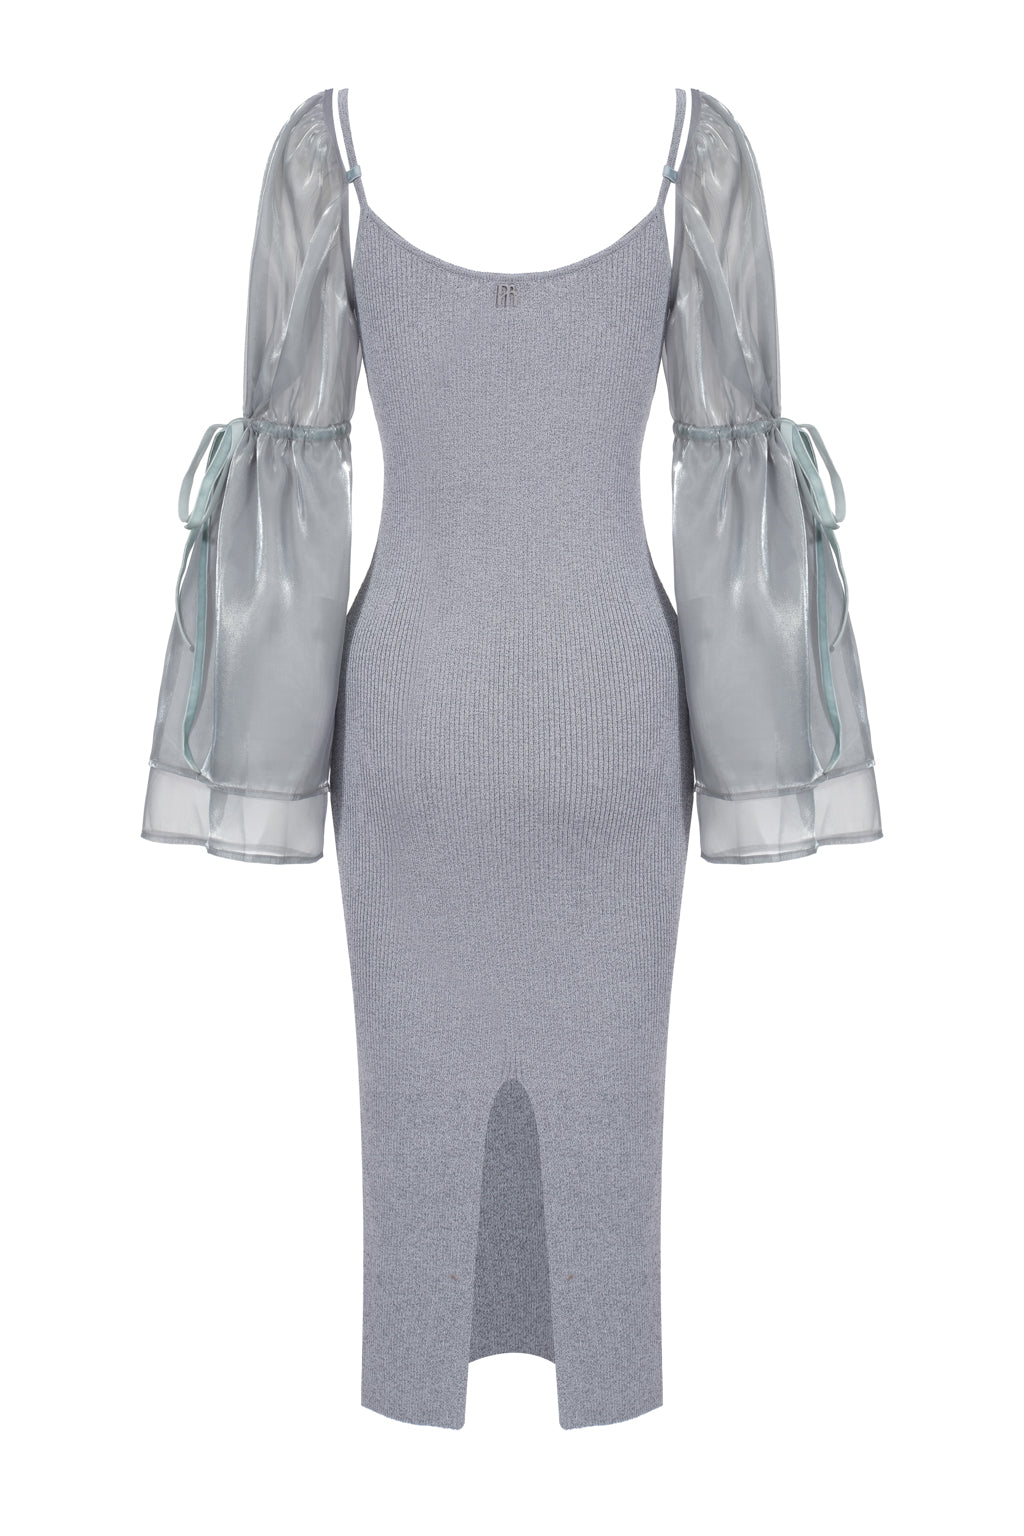 Reflective knit dress with detachable sleeves in organza - opal grey